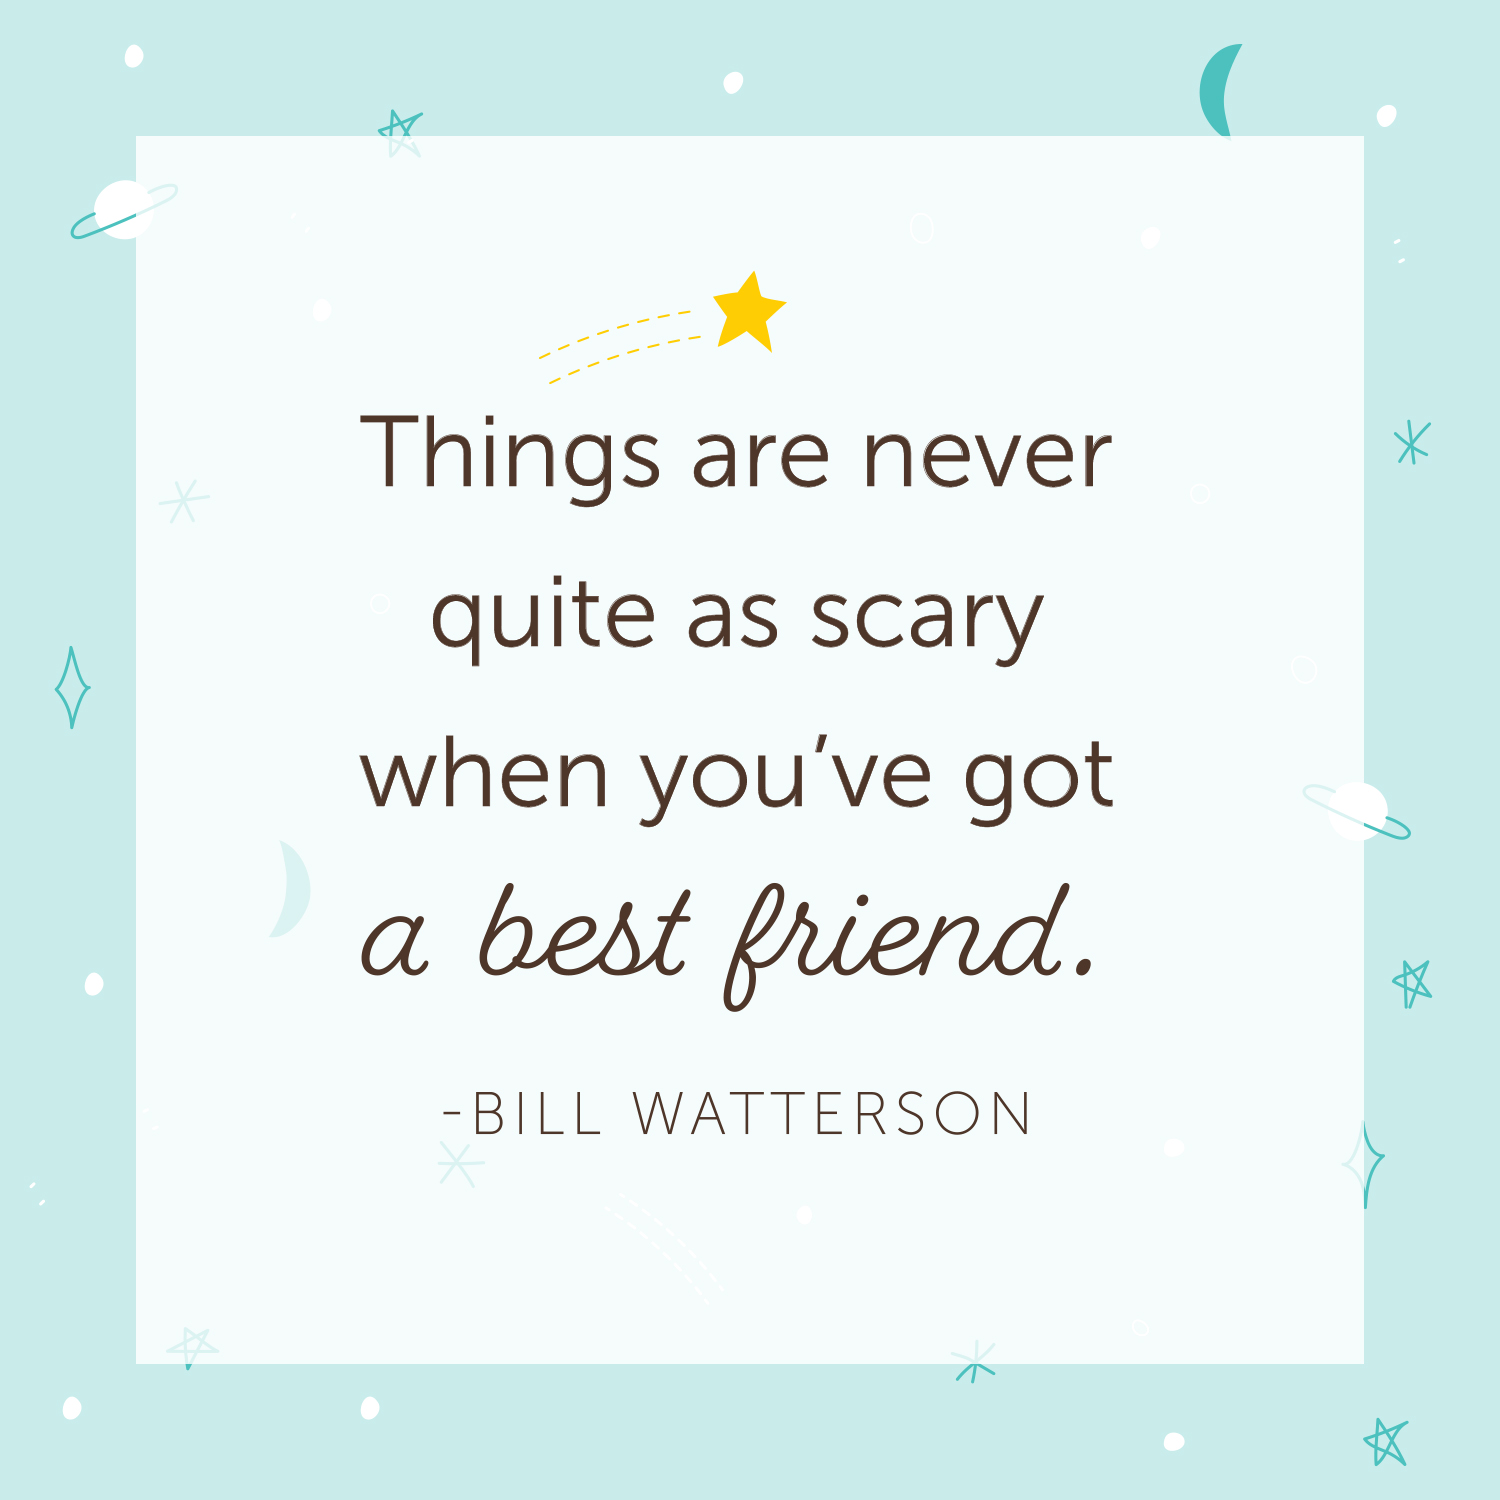 50+ Friendship Quotes to Share With Your BFF